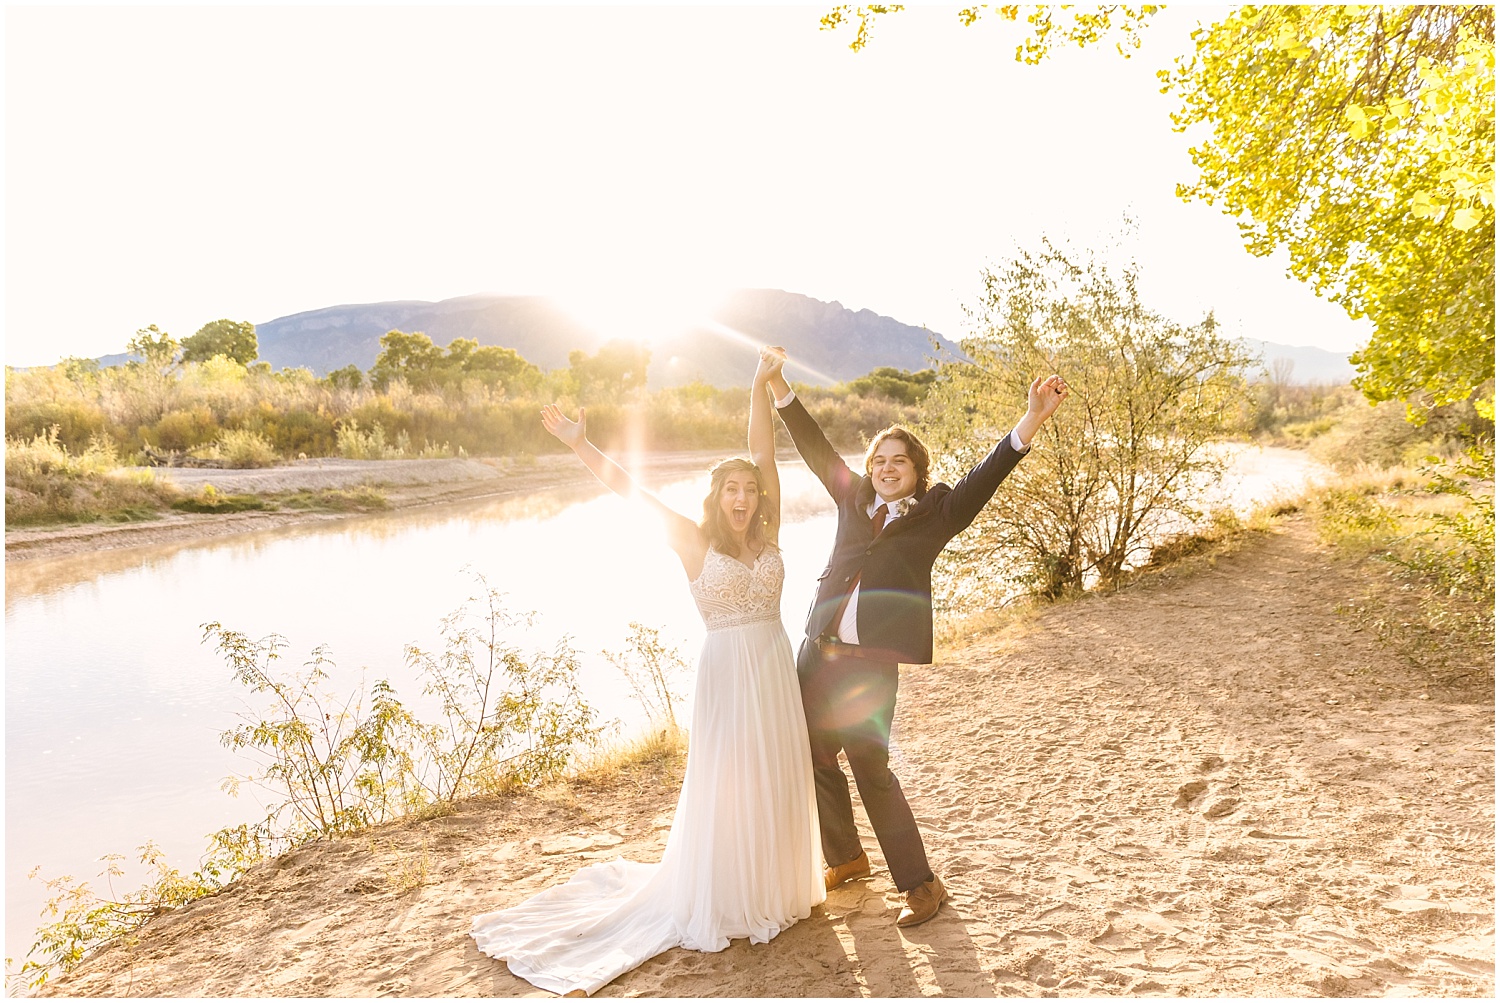 Bride and groom celebrating at sunrise elopement in Albuquerque New Mexico